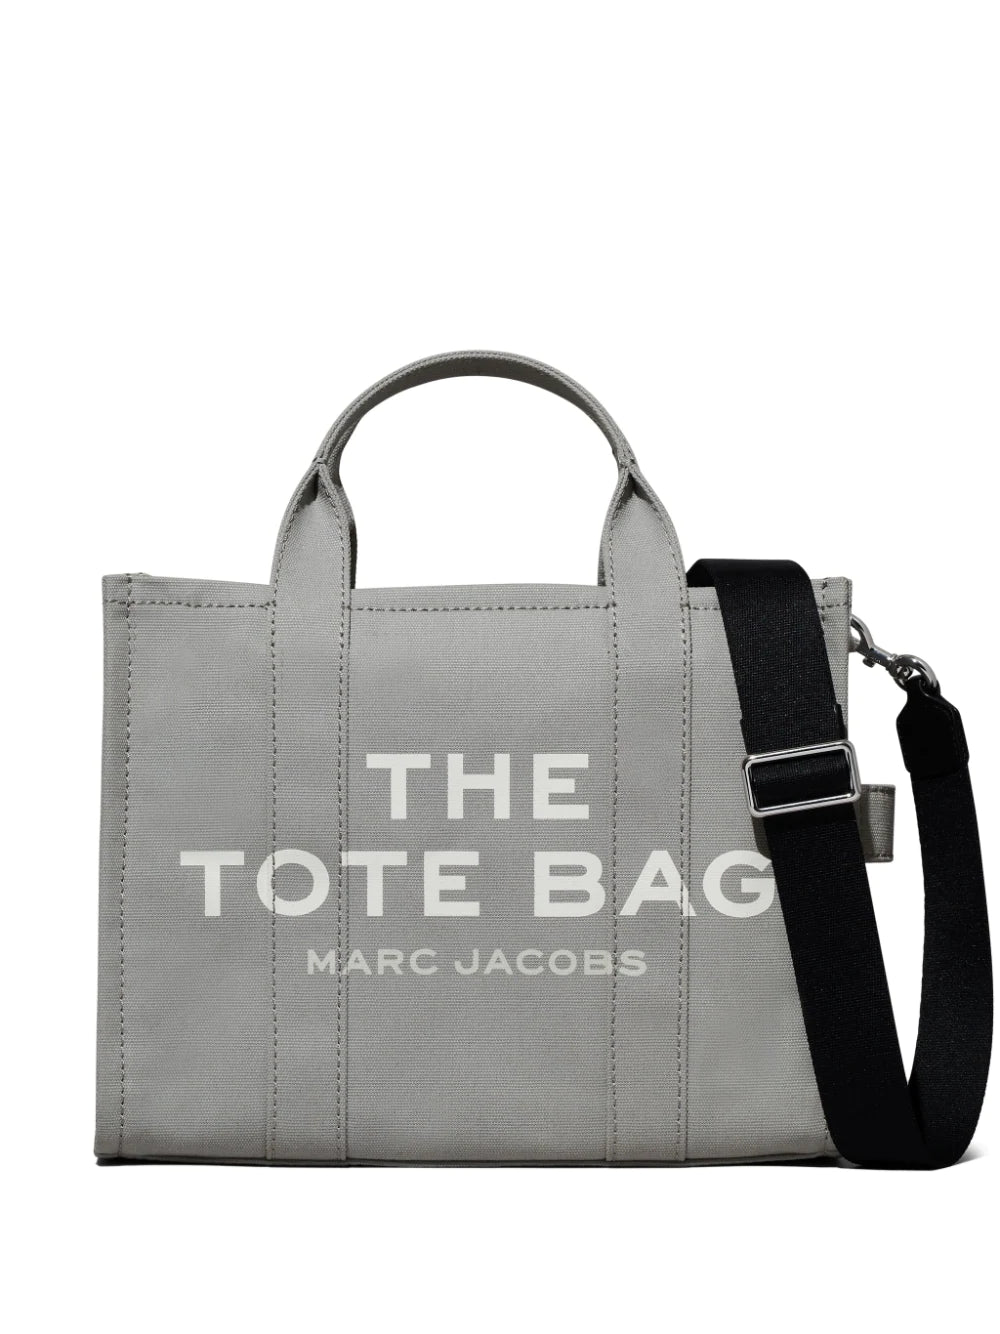 THE TOTE BAG MARC JACOBS REVIEW + SIZE COMPARISON SMALL VS LARGE +